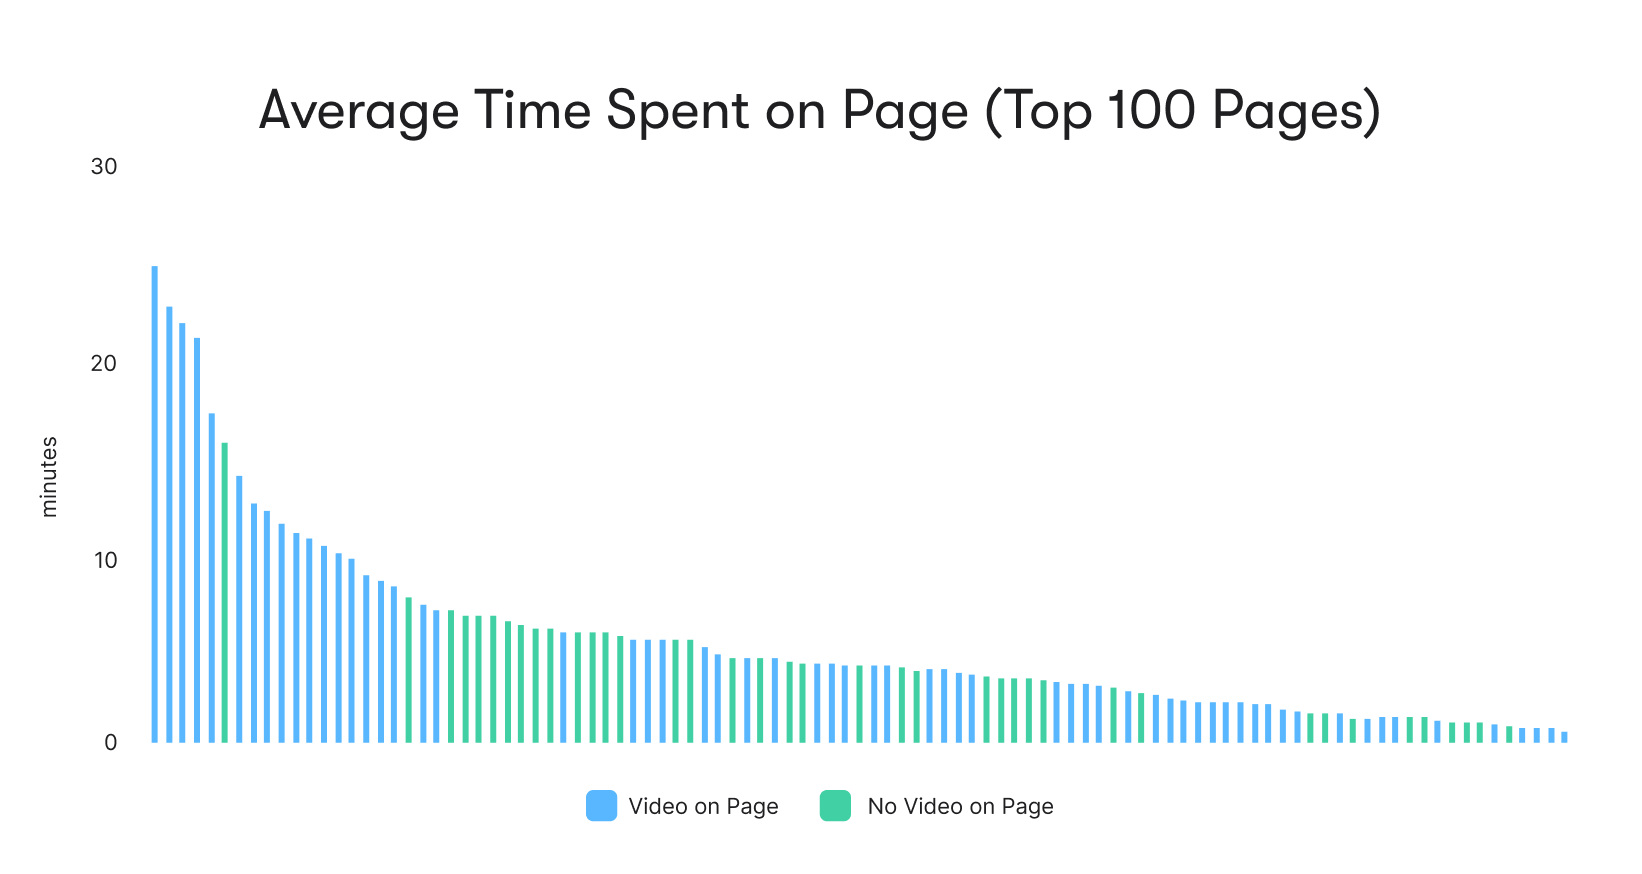 Average time spent on a page